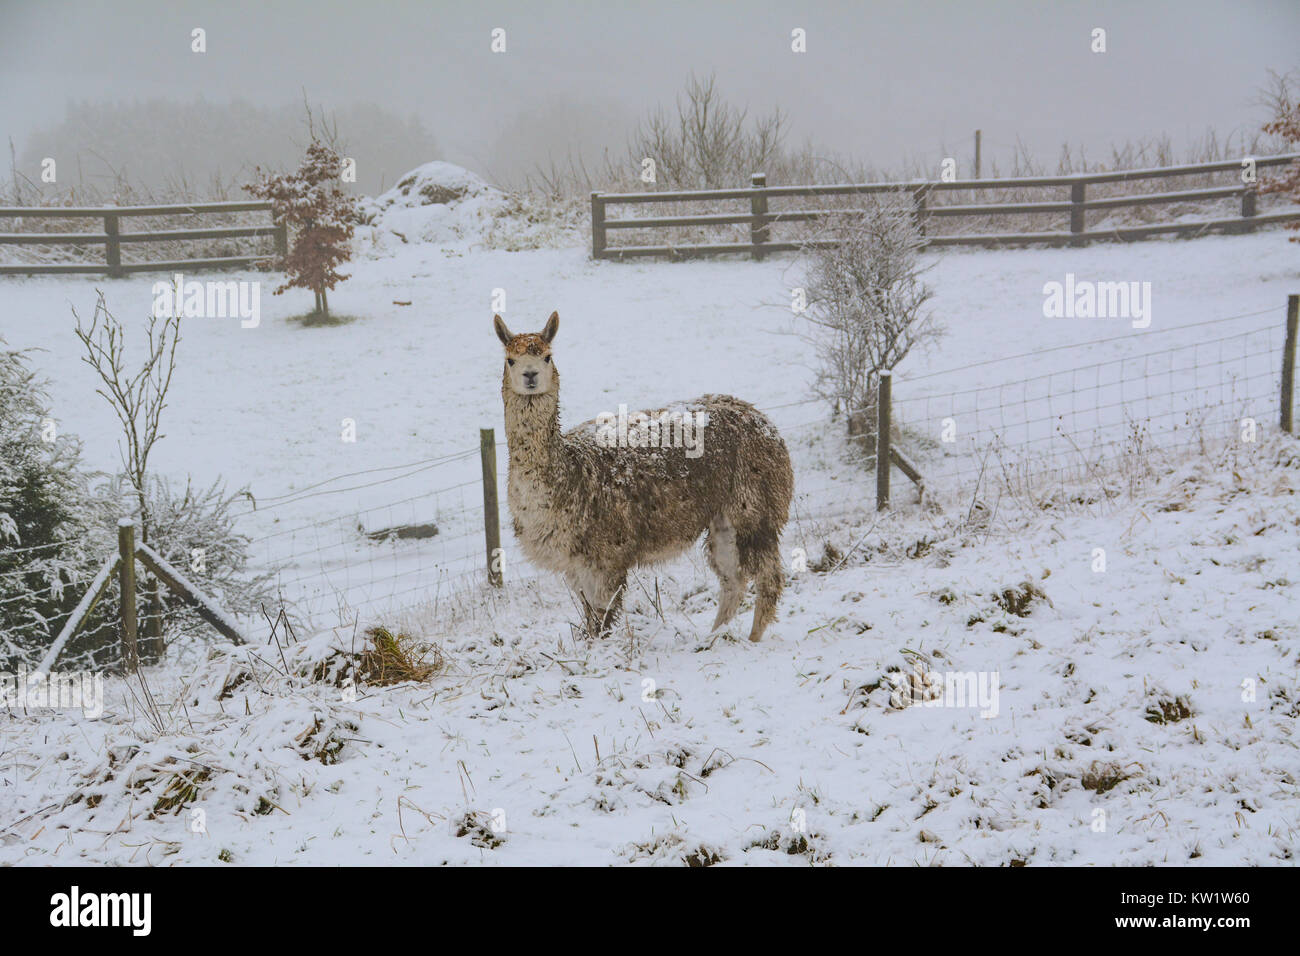 Milnrow, near Rochdale, Lancashire, UK. 29th Dec, 2017. Uk Weather. Snow fell this morning again, on the foothills of the Penines. This Llama seemed quite at home. Credit: Simon Maycock/Alamy Live News Stock Photo